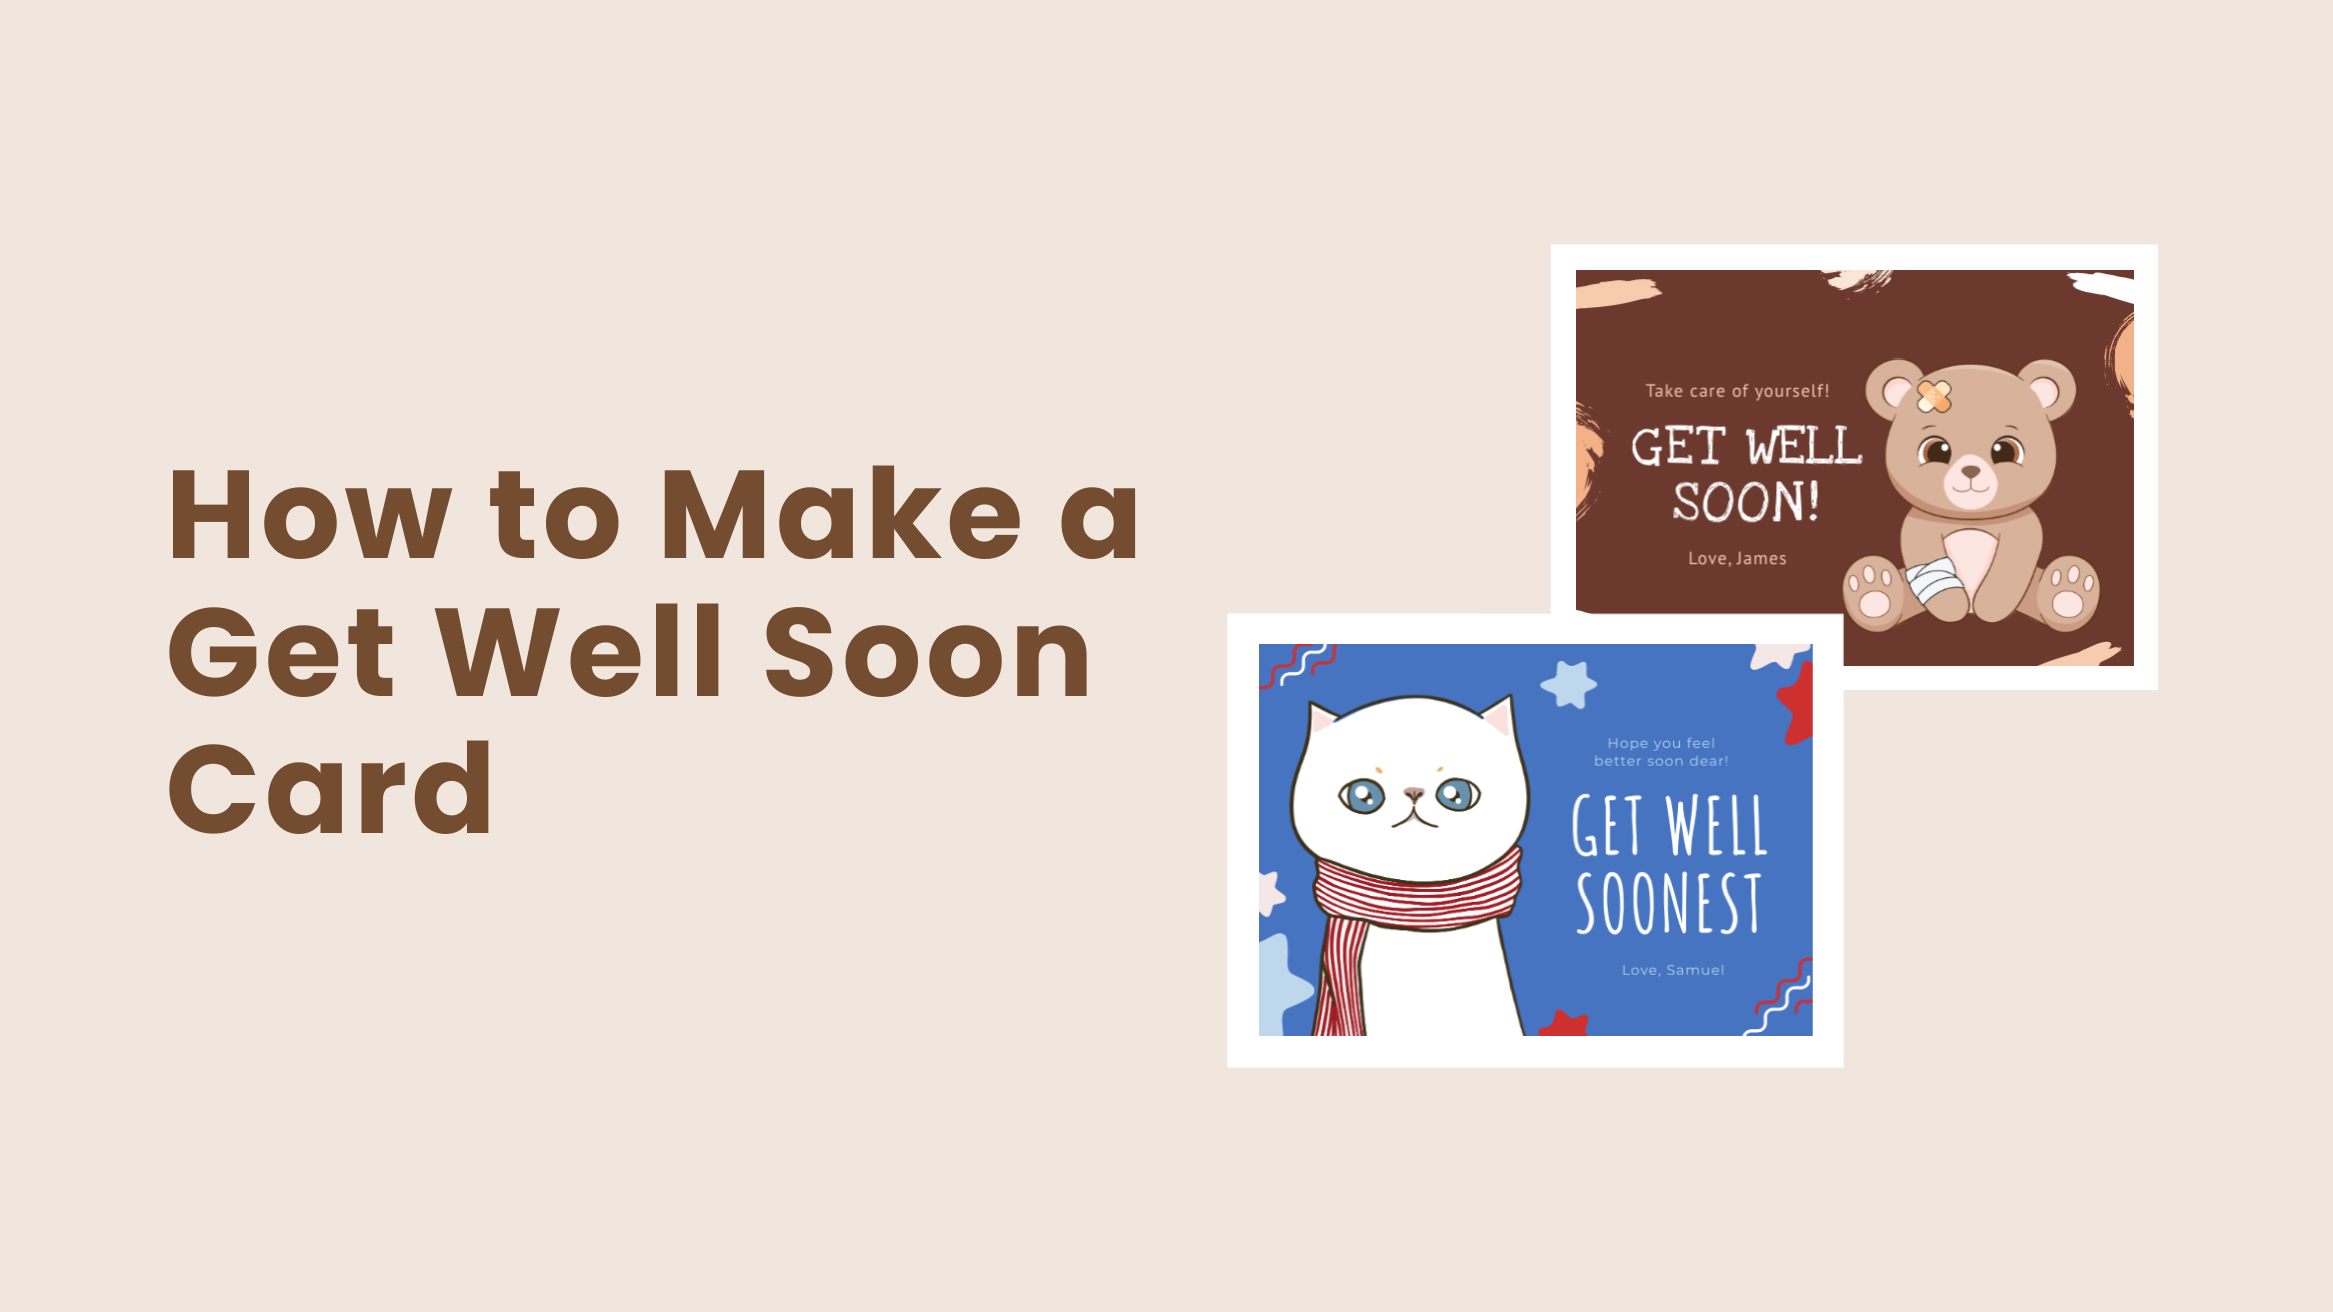 How to Make a Get Well Soon Card